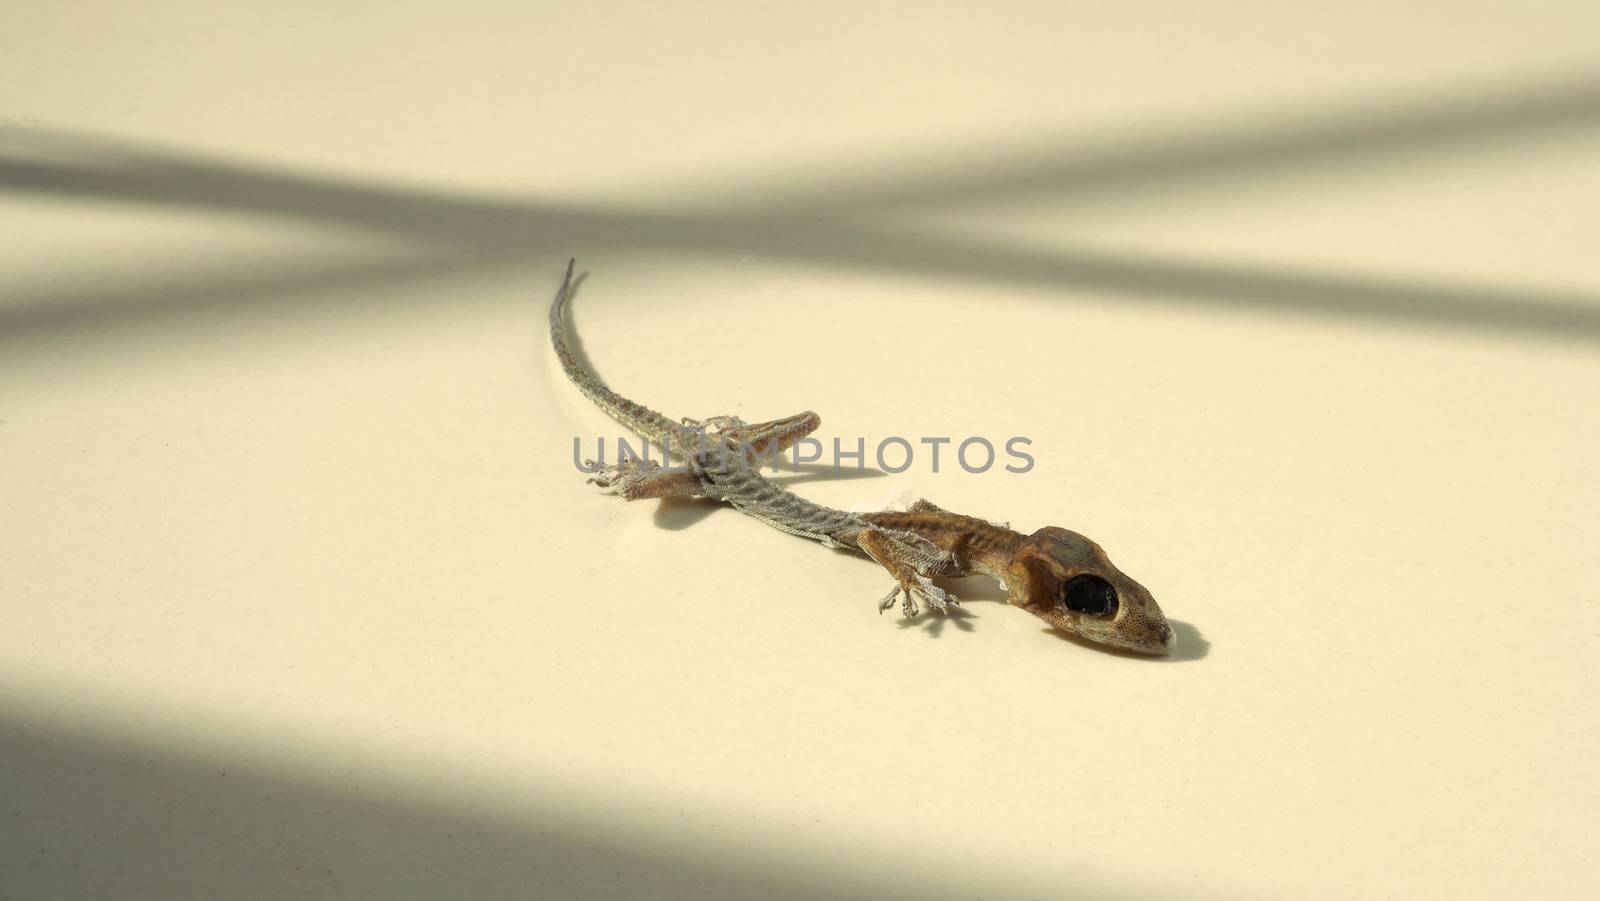 Close-up images of Asia small dead lizard  by gnepphoto